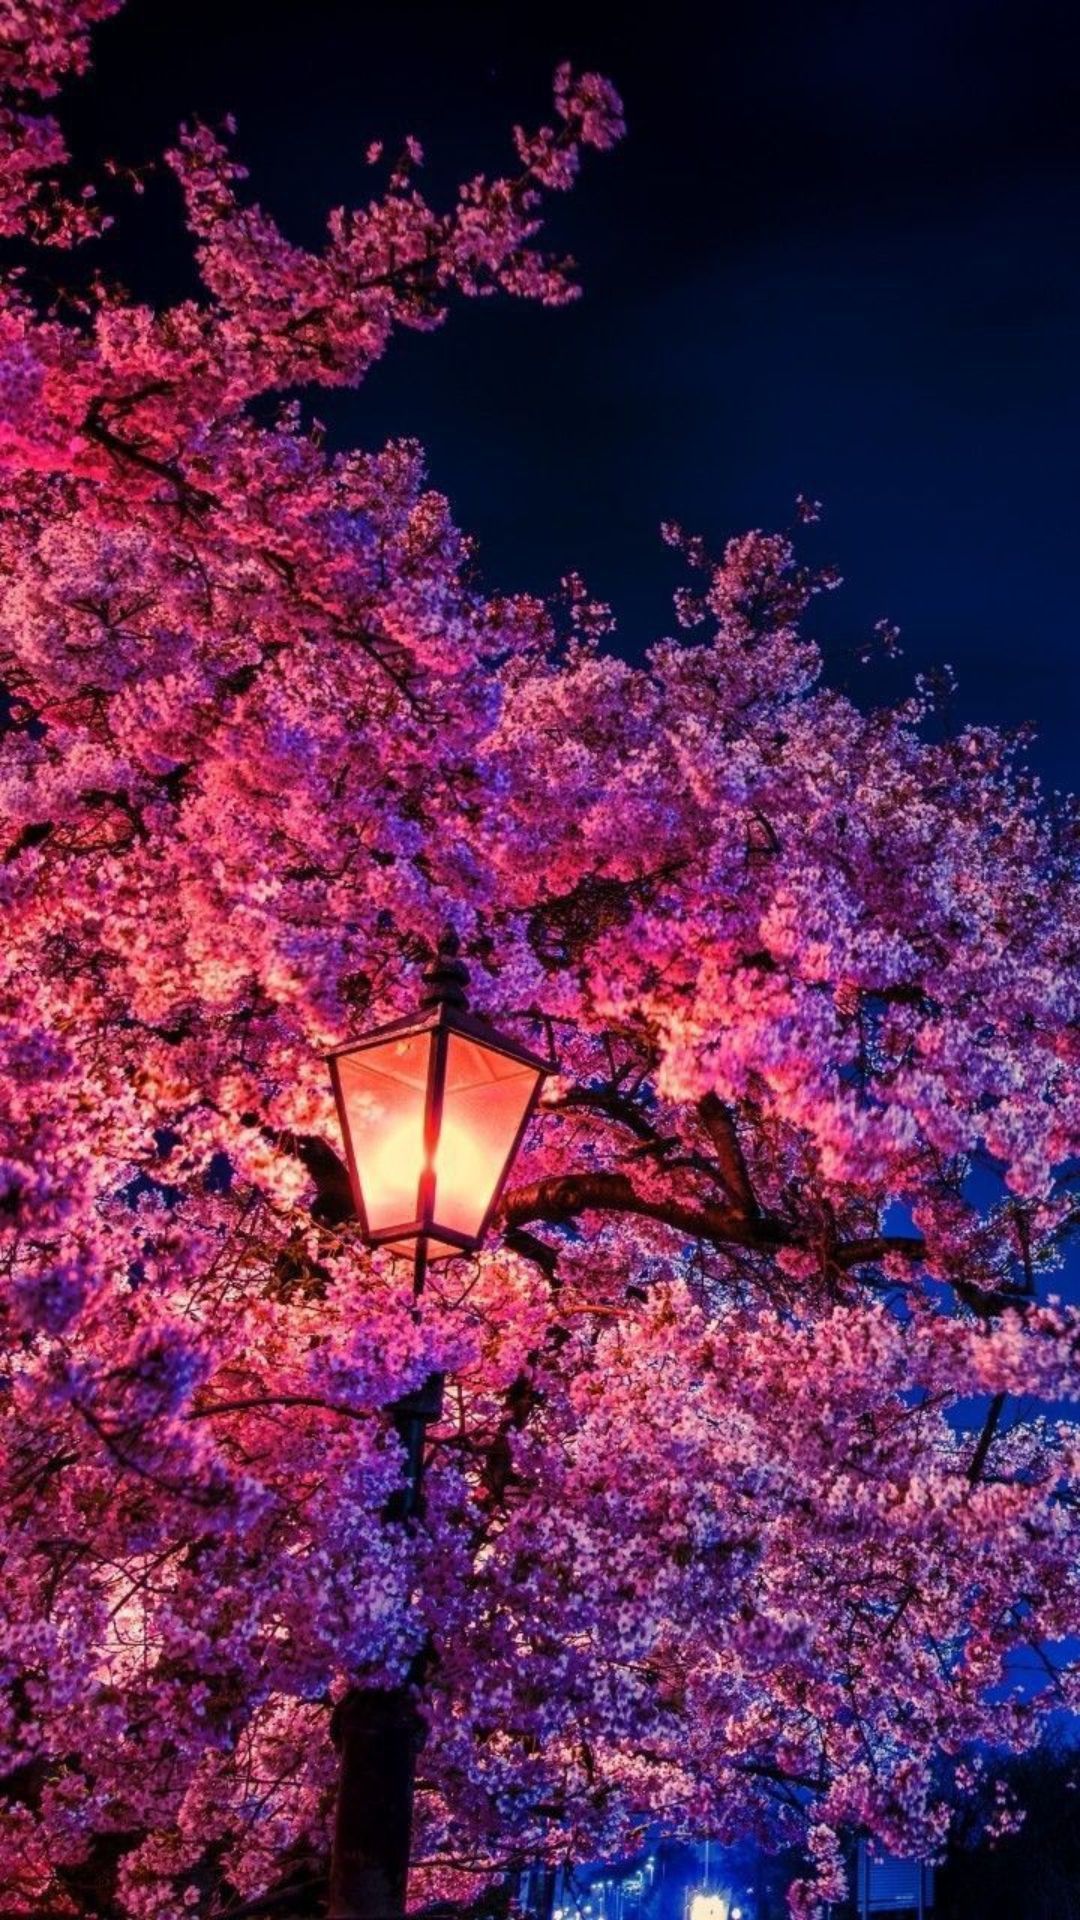 A street lamp in the middle of cherry blossom trees - Cherry blossom, cherry